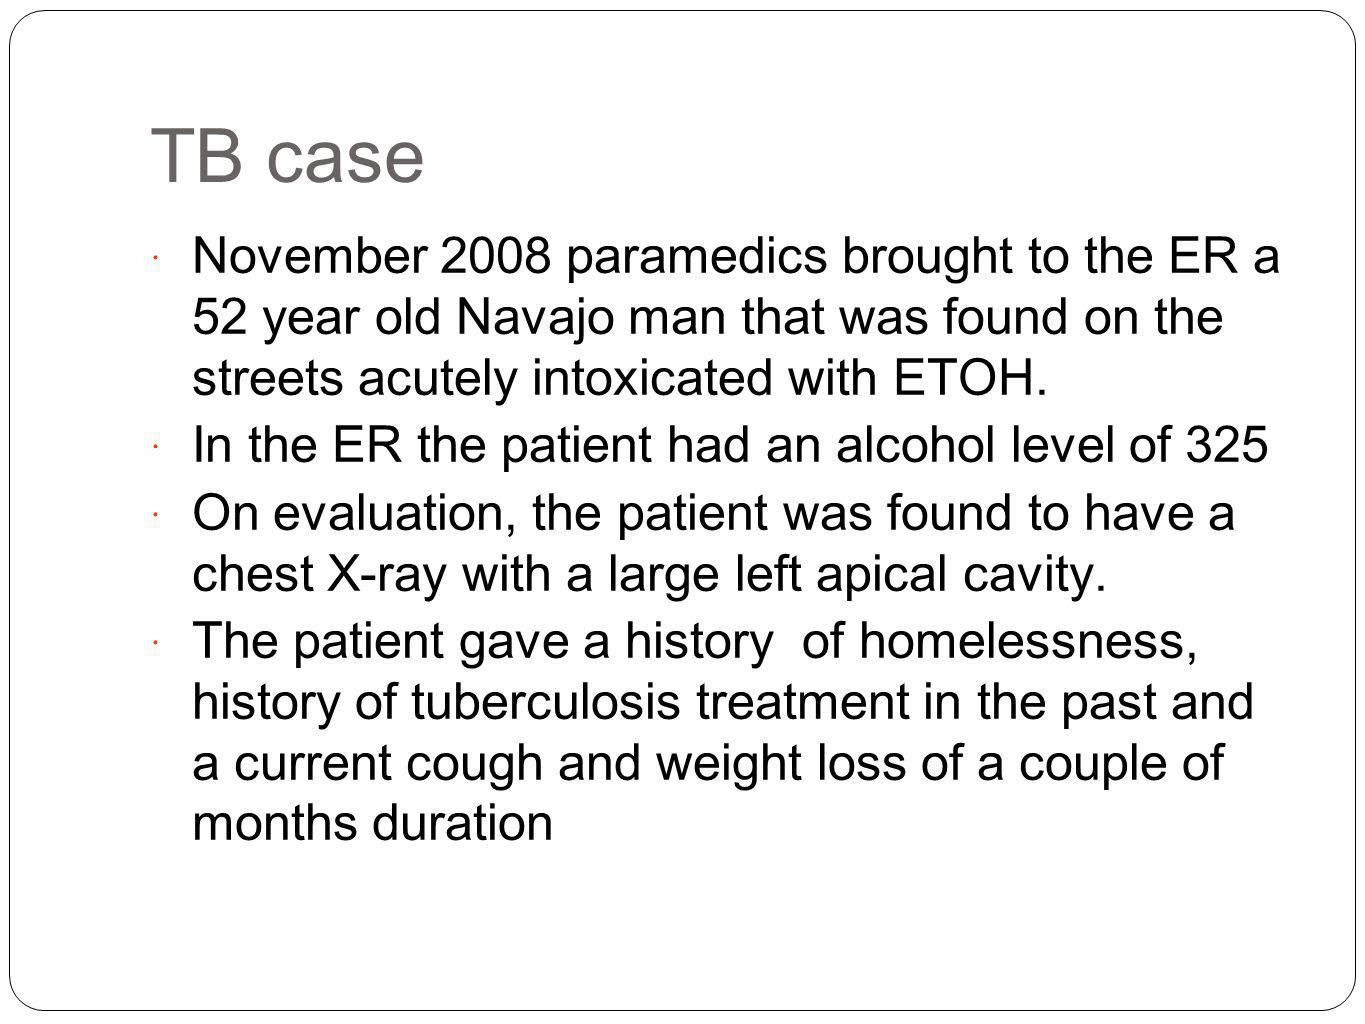 A Homeless Alcoholic Patient with TB - ppt download